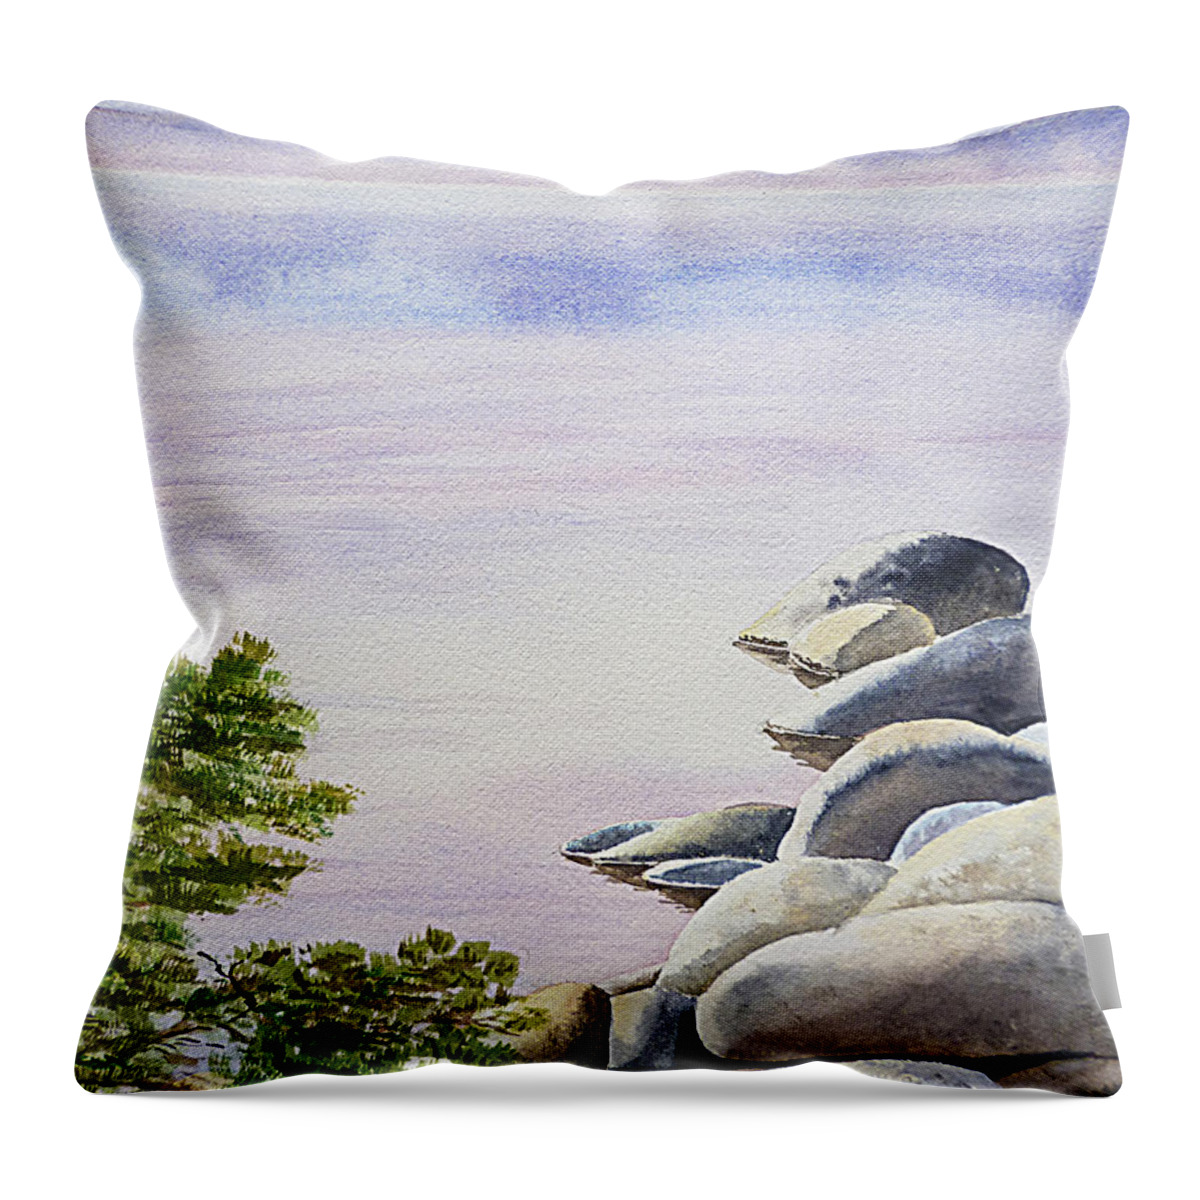 Affirmation Throw Pillow featuring the painting Peaceful Place Morning at The Lake by Irina Sztukowski